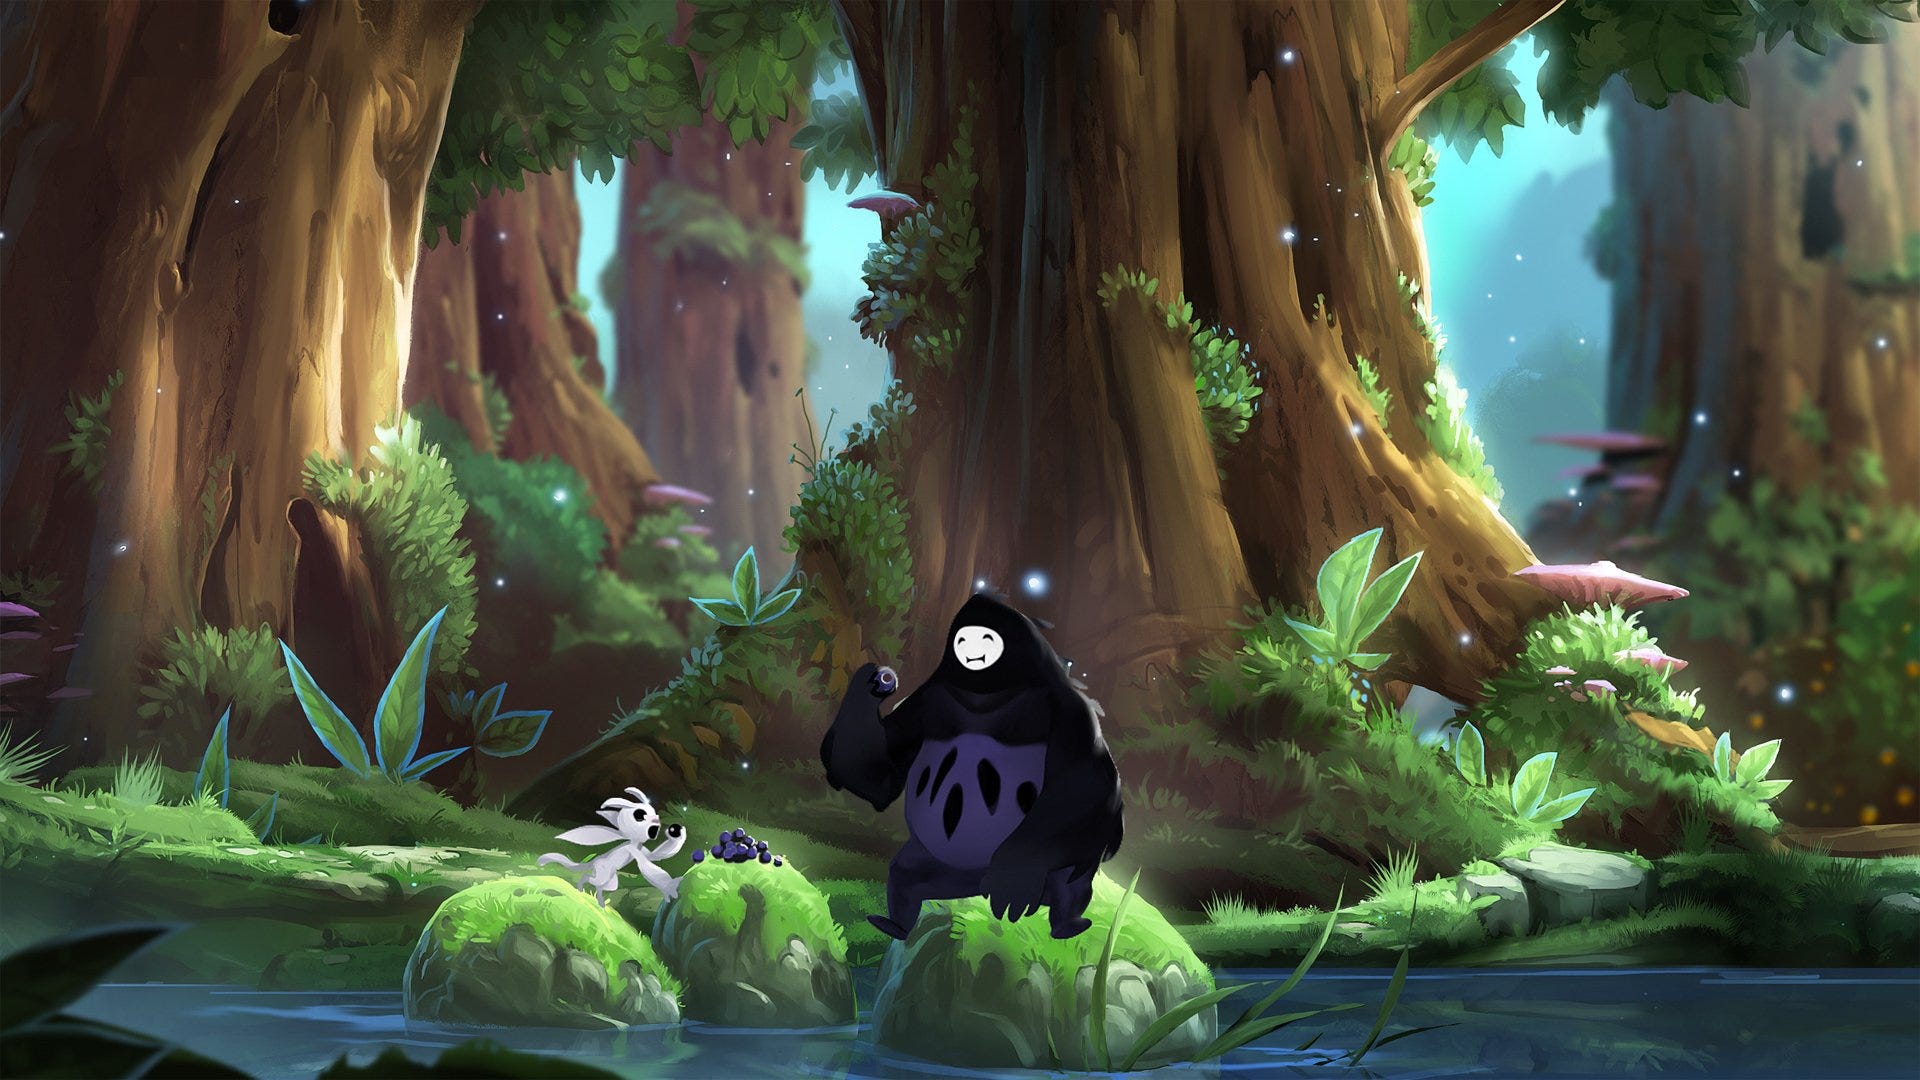 Ori And The Blind Forest Definitive Edition By Nic Chan Medium